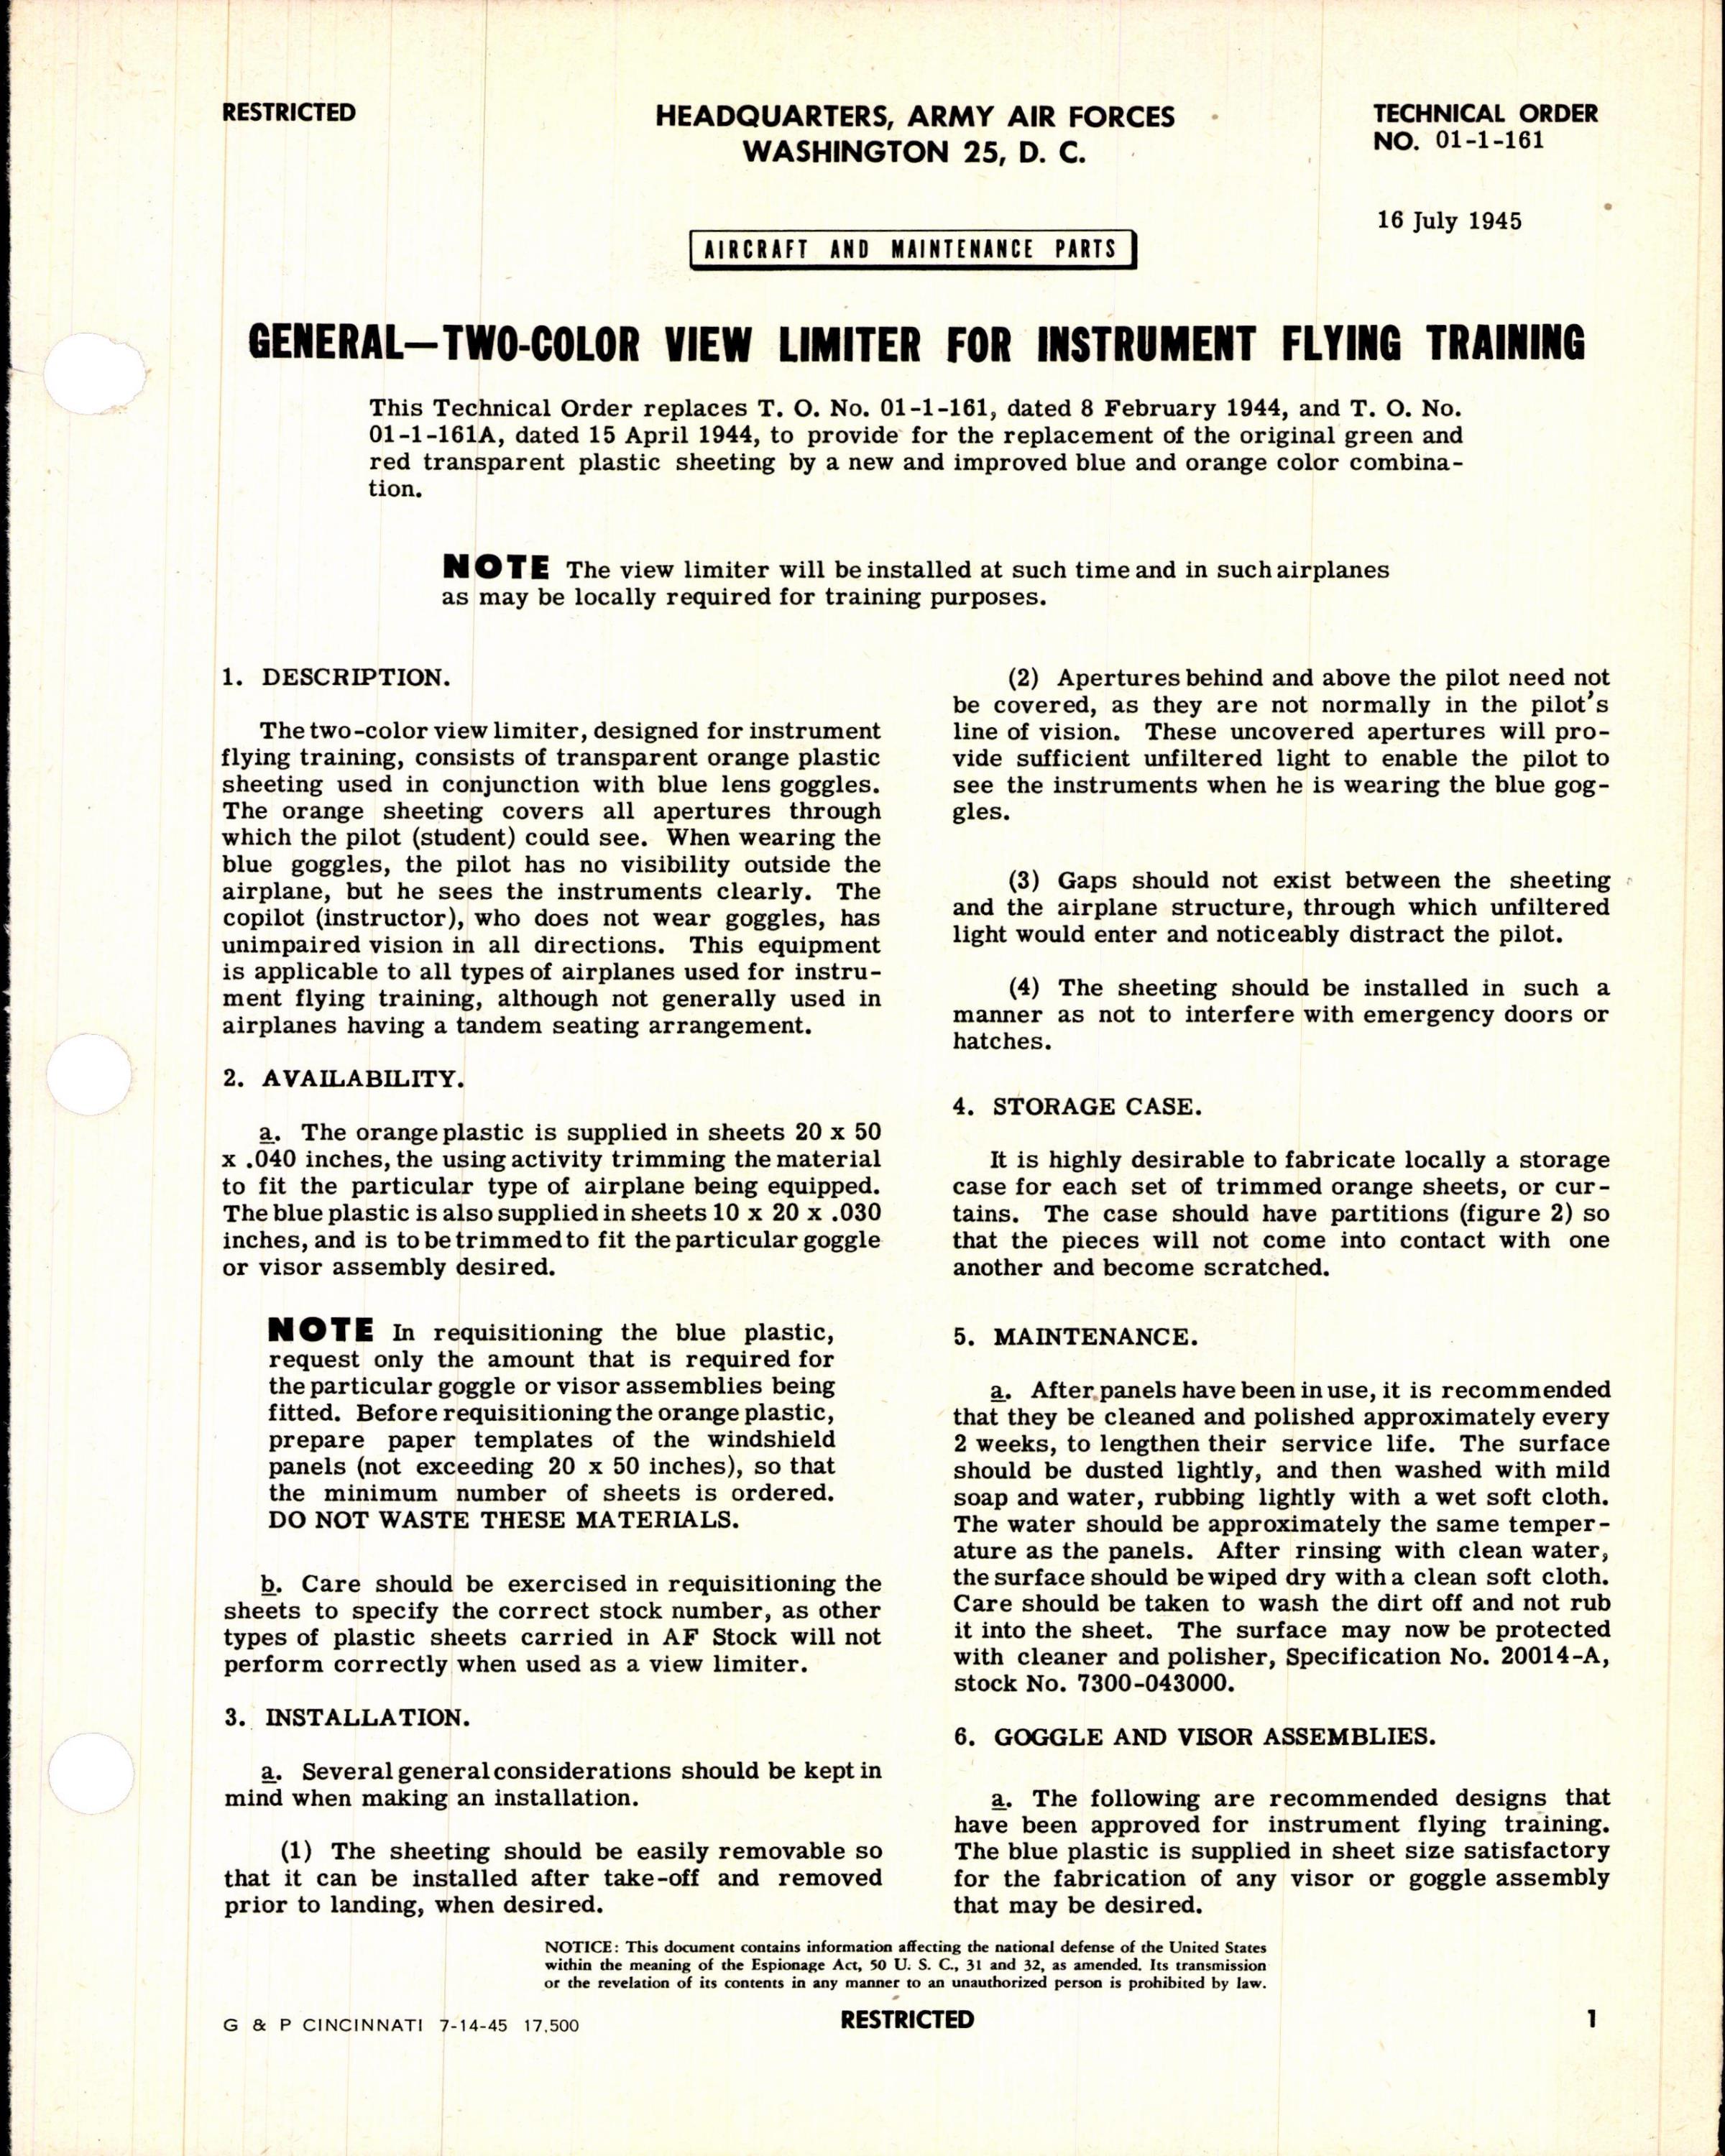 Sample page 1 from AirCorps Library document: Two-Color View Limiter for Instrument Flying Training